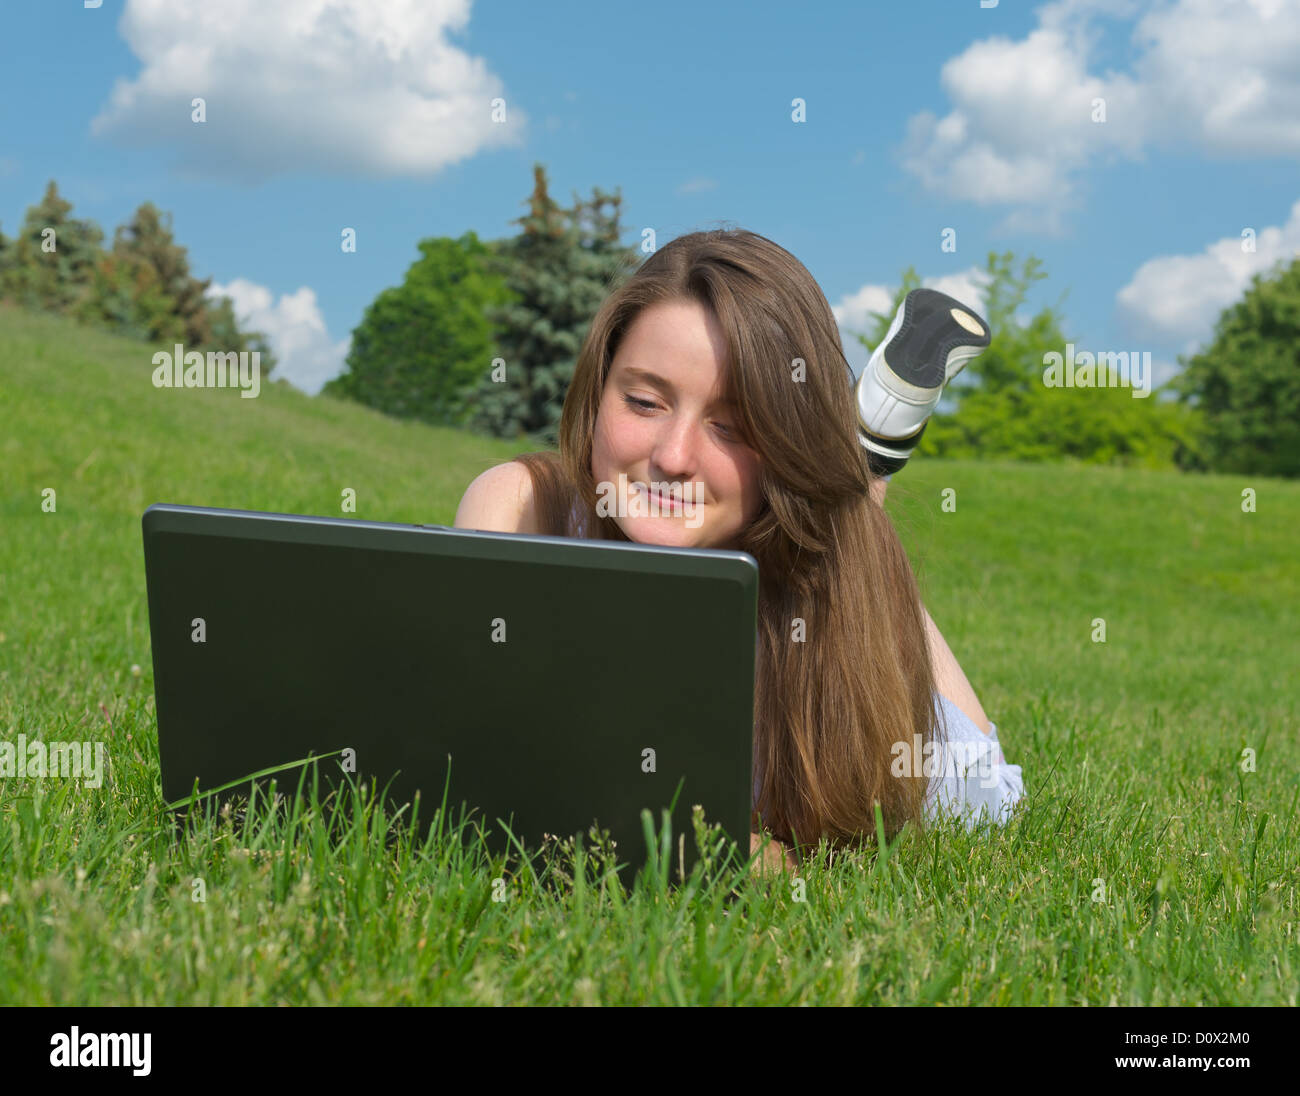 Smiling young woman lying on her stomach in the grass using a laptop outdoors Stock Photo